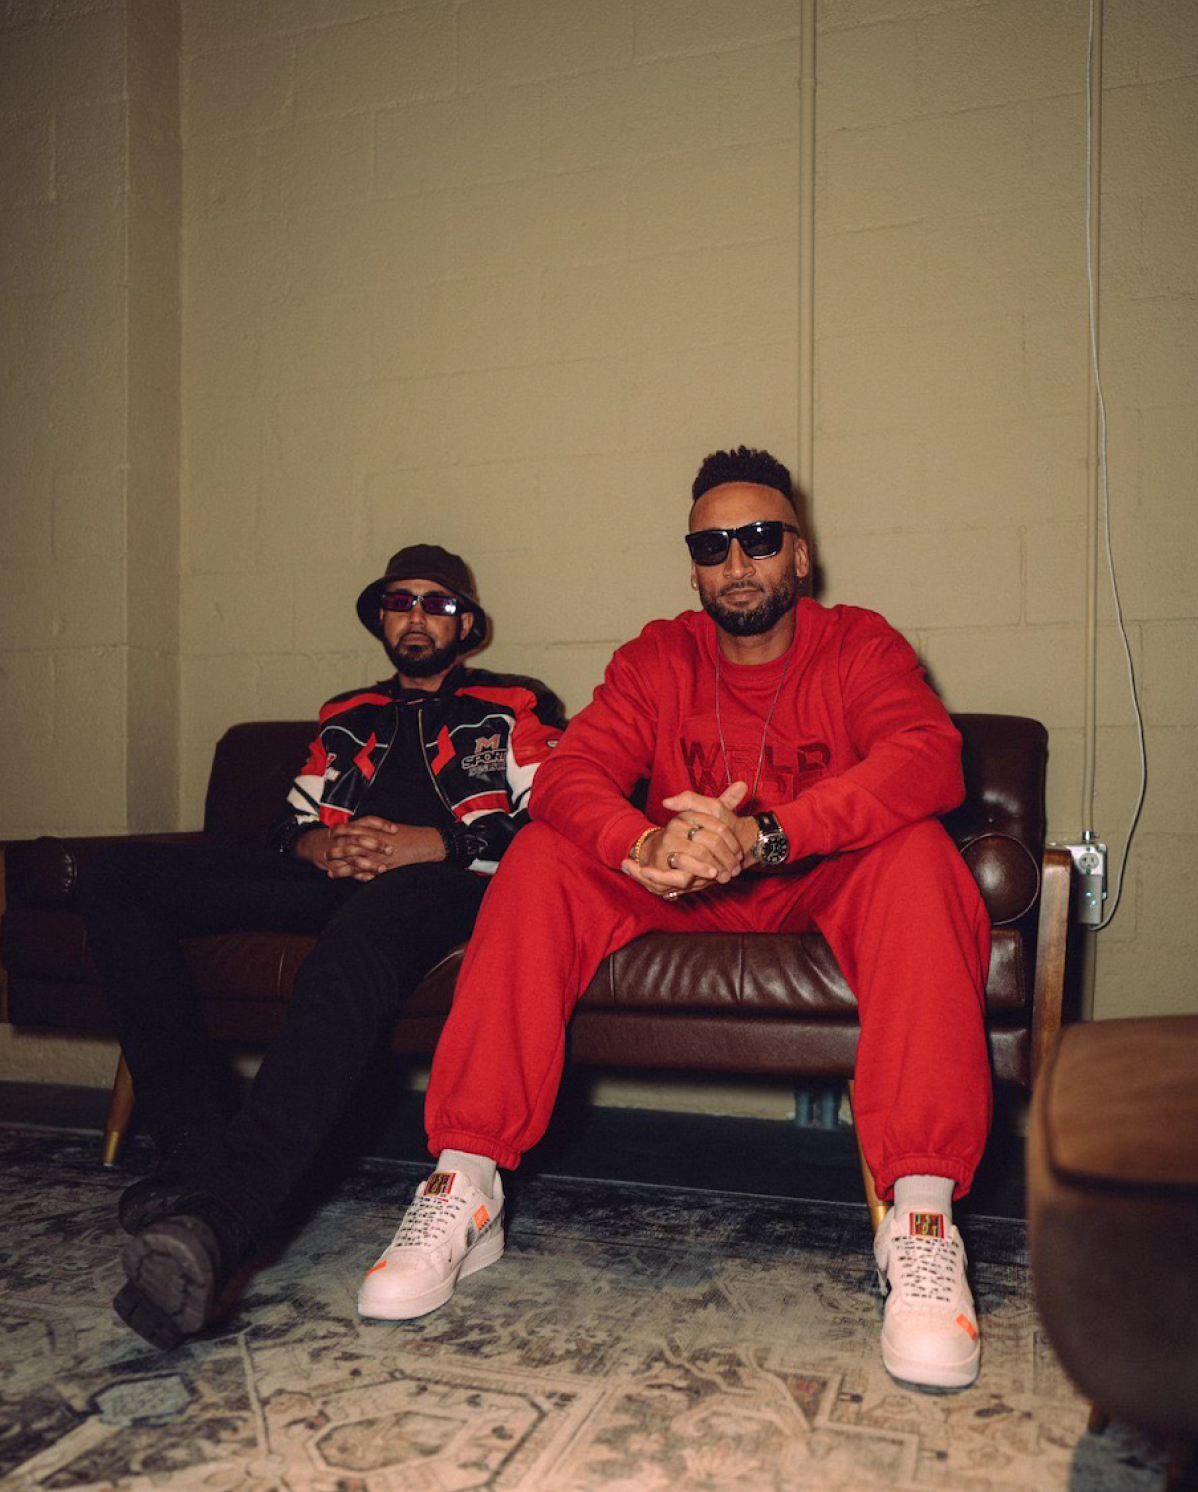 Two men sit on a brown leather couch in a dimly lit room. The man on the left wears a black bucket hat, sunglasses, a black and red jacket, and black pants. The man on the right wears sunglasses, a bright red tracksuit, and white sneakers. Both have a serious expression.